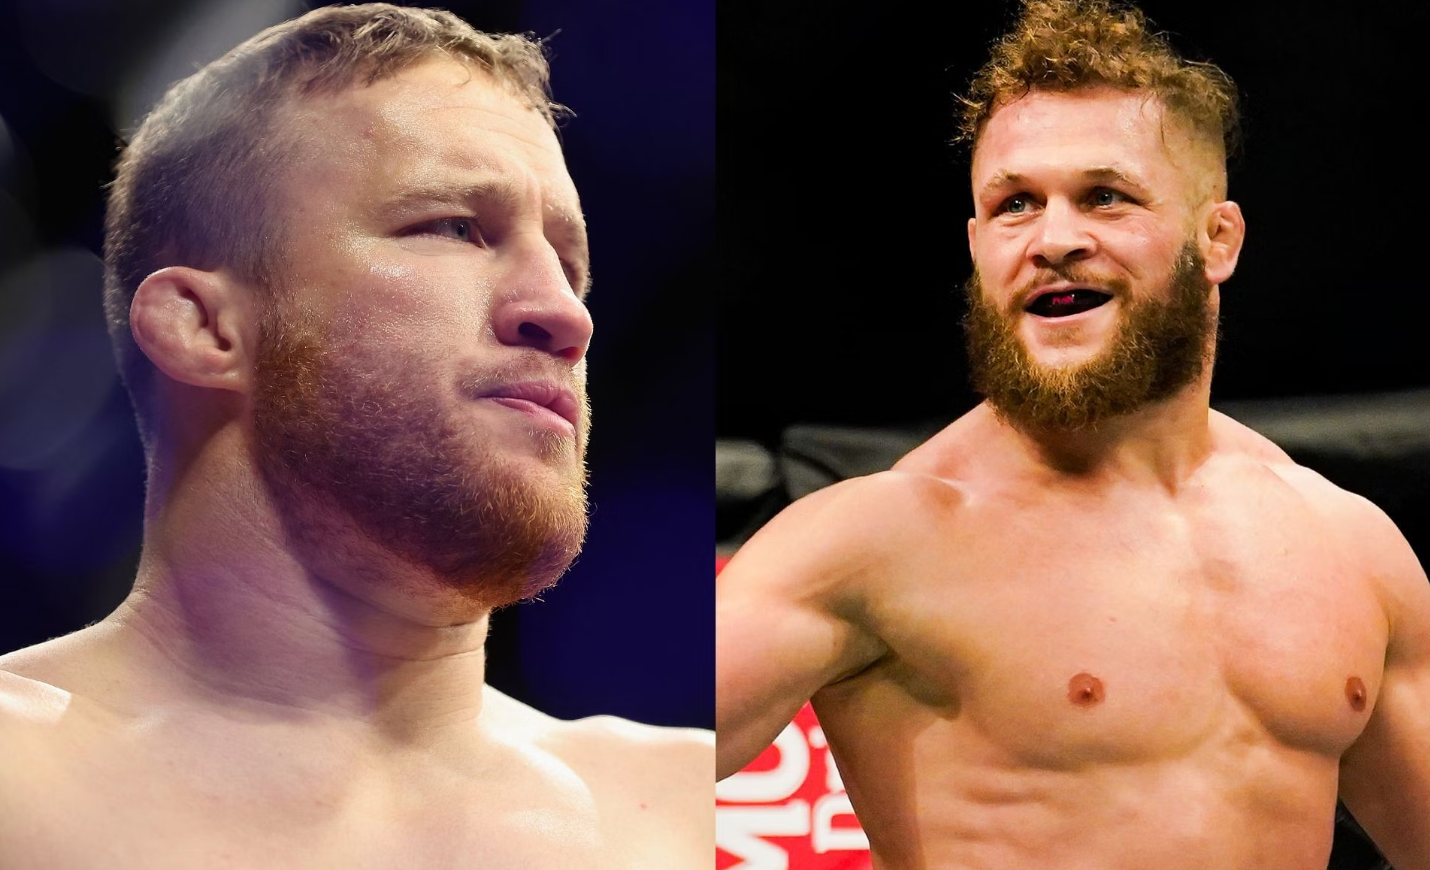 Justin Gaethje vs Rafael Fiziev: Preview, Where to Watch and Betting Odds